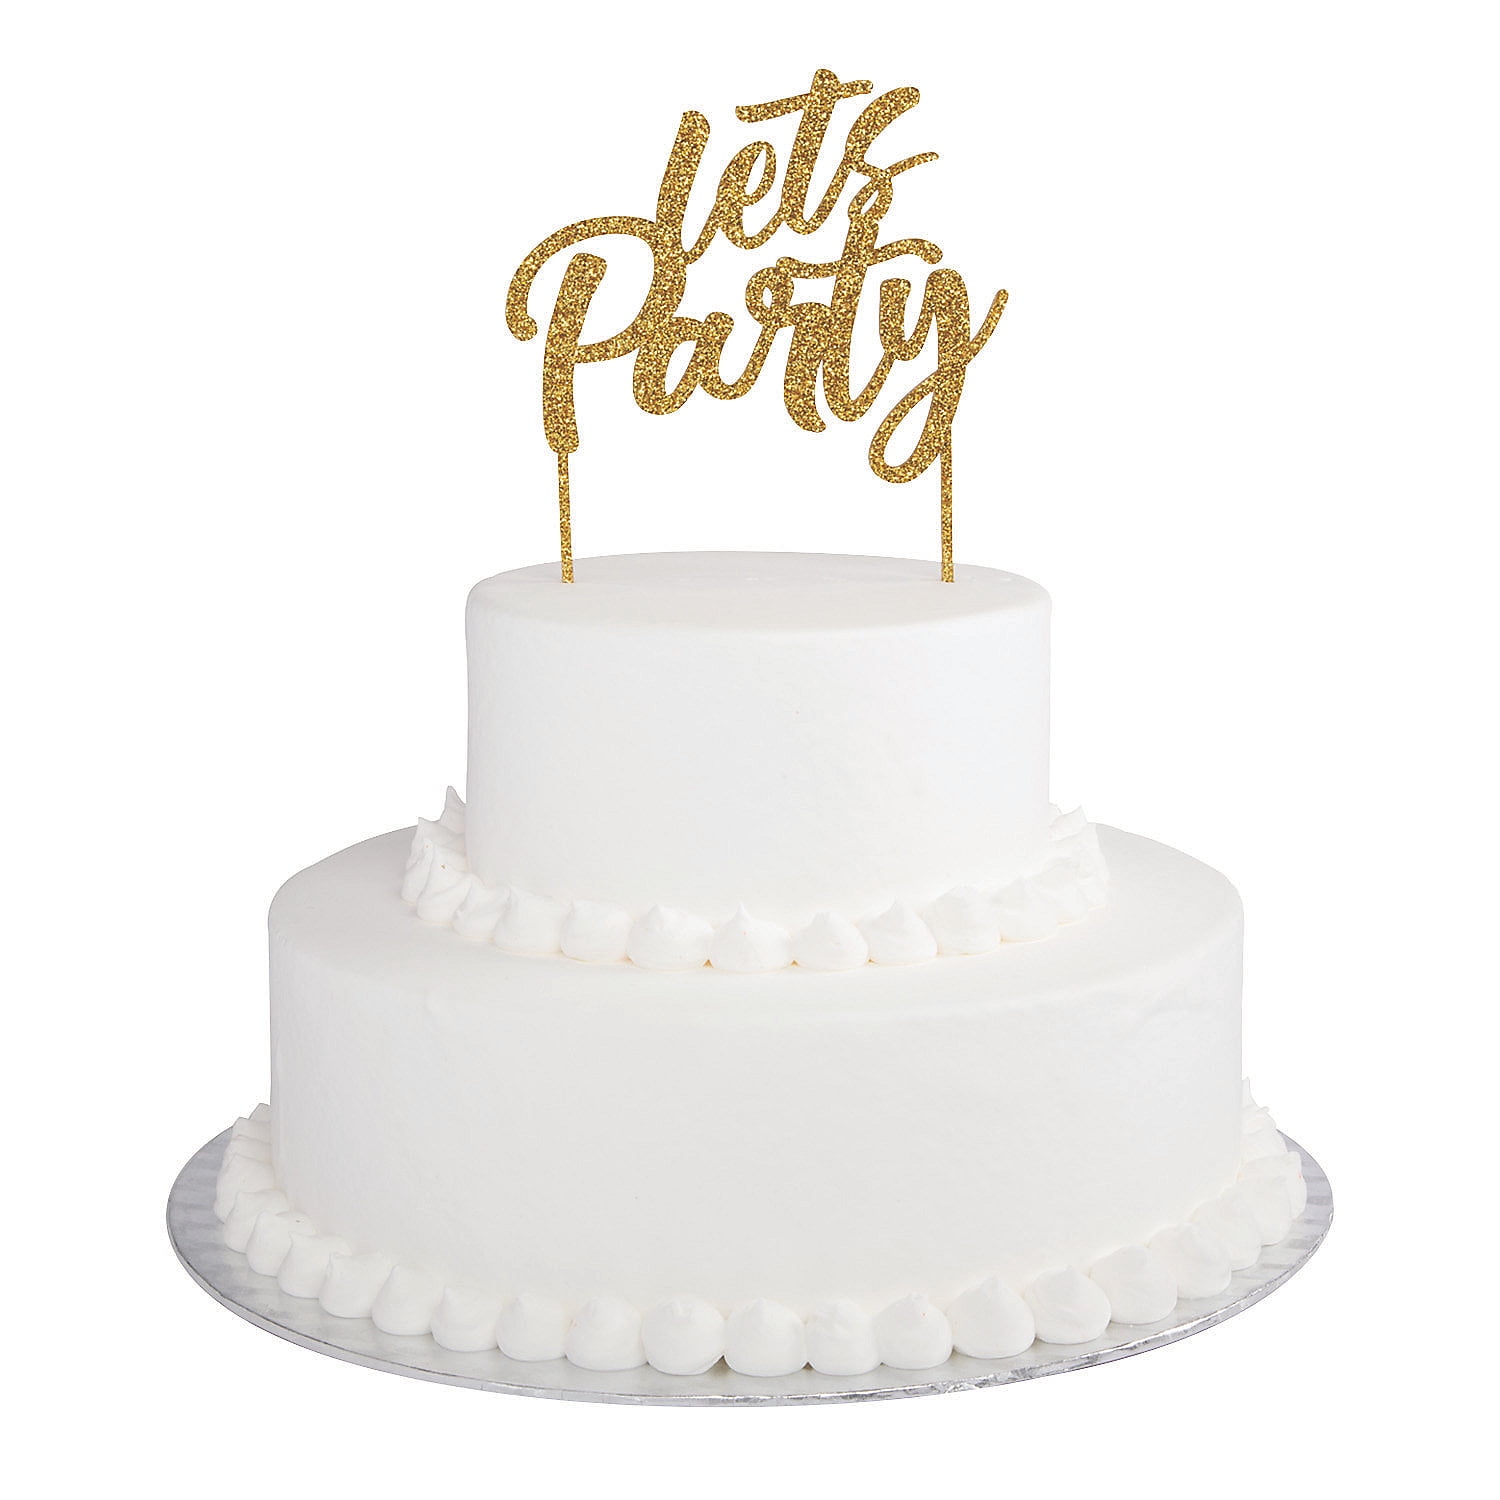 Let'S Party Gold Cake Topper - Home Decor - 1 Piece 